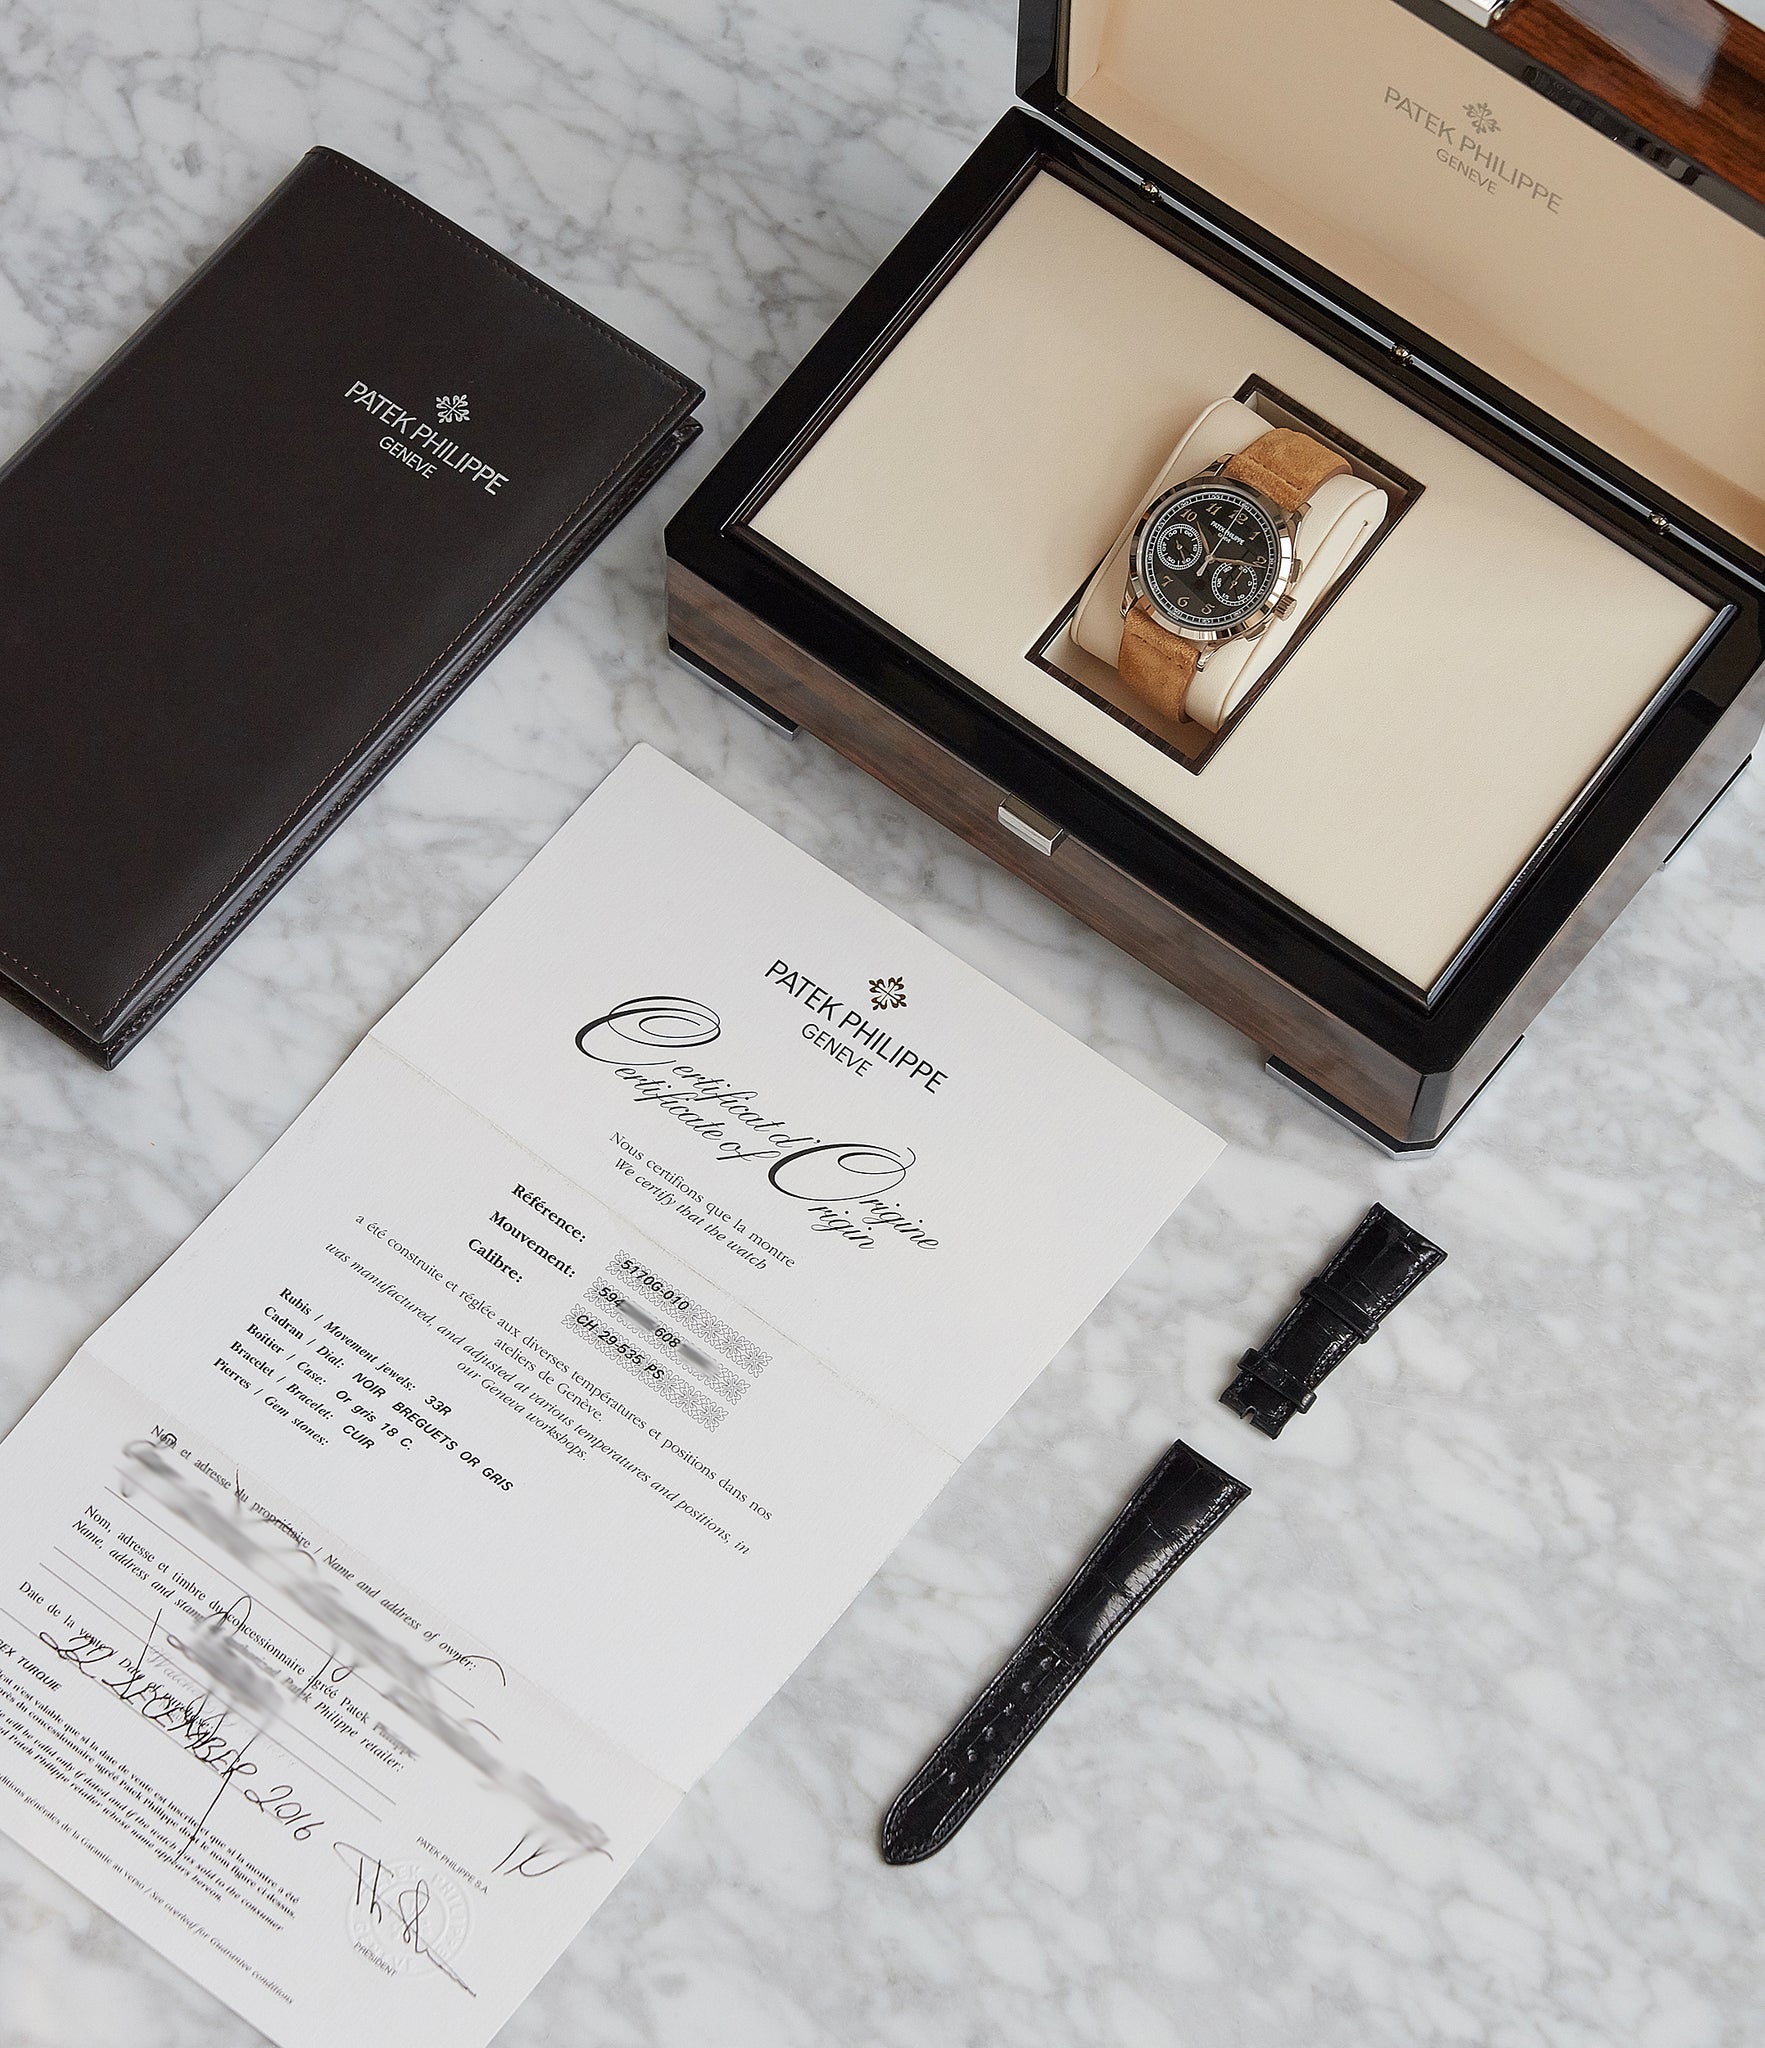 full set pre-owned Patek Philippe 5170G-010 Chronograph black dial manual-winding watch for sale online at A Collected Man London UK specialist of rare watches